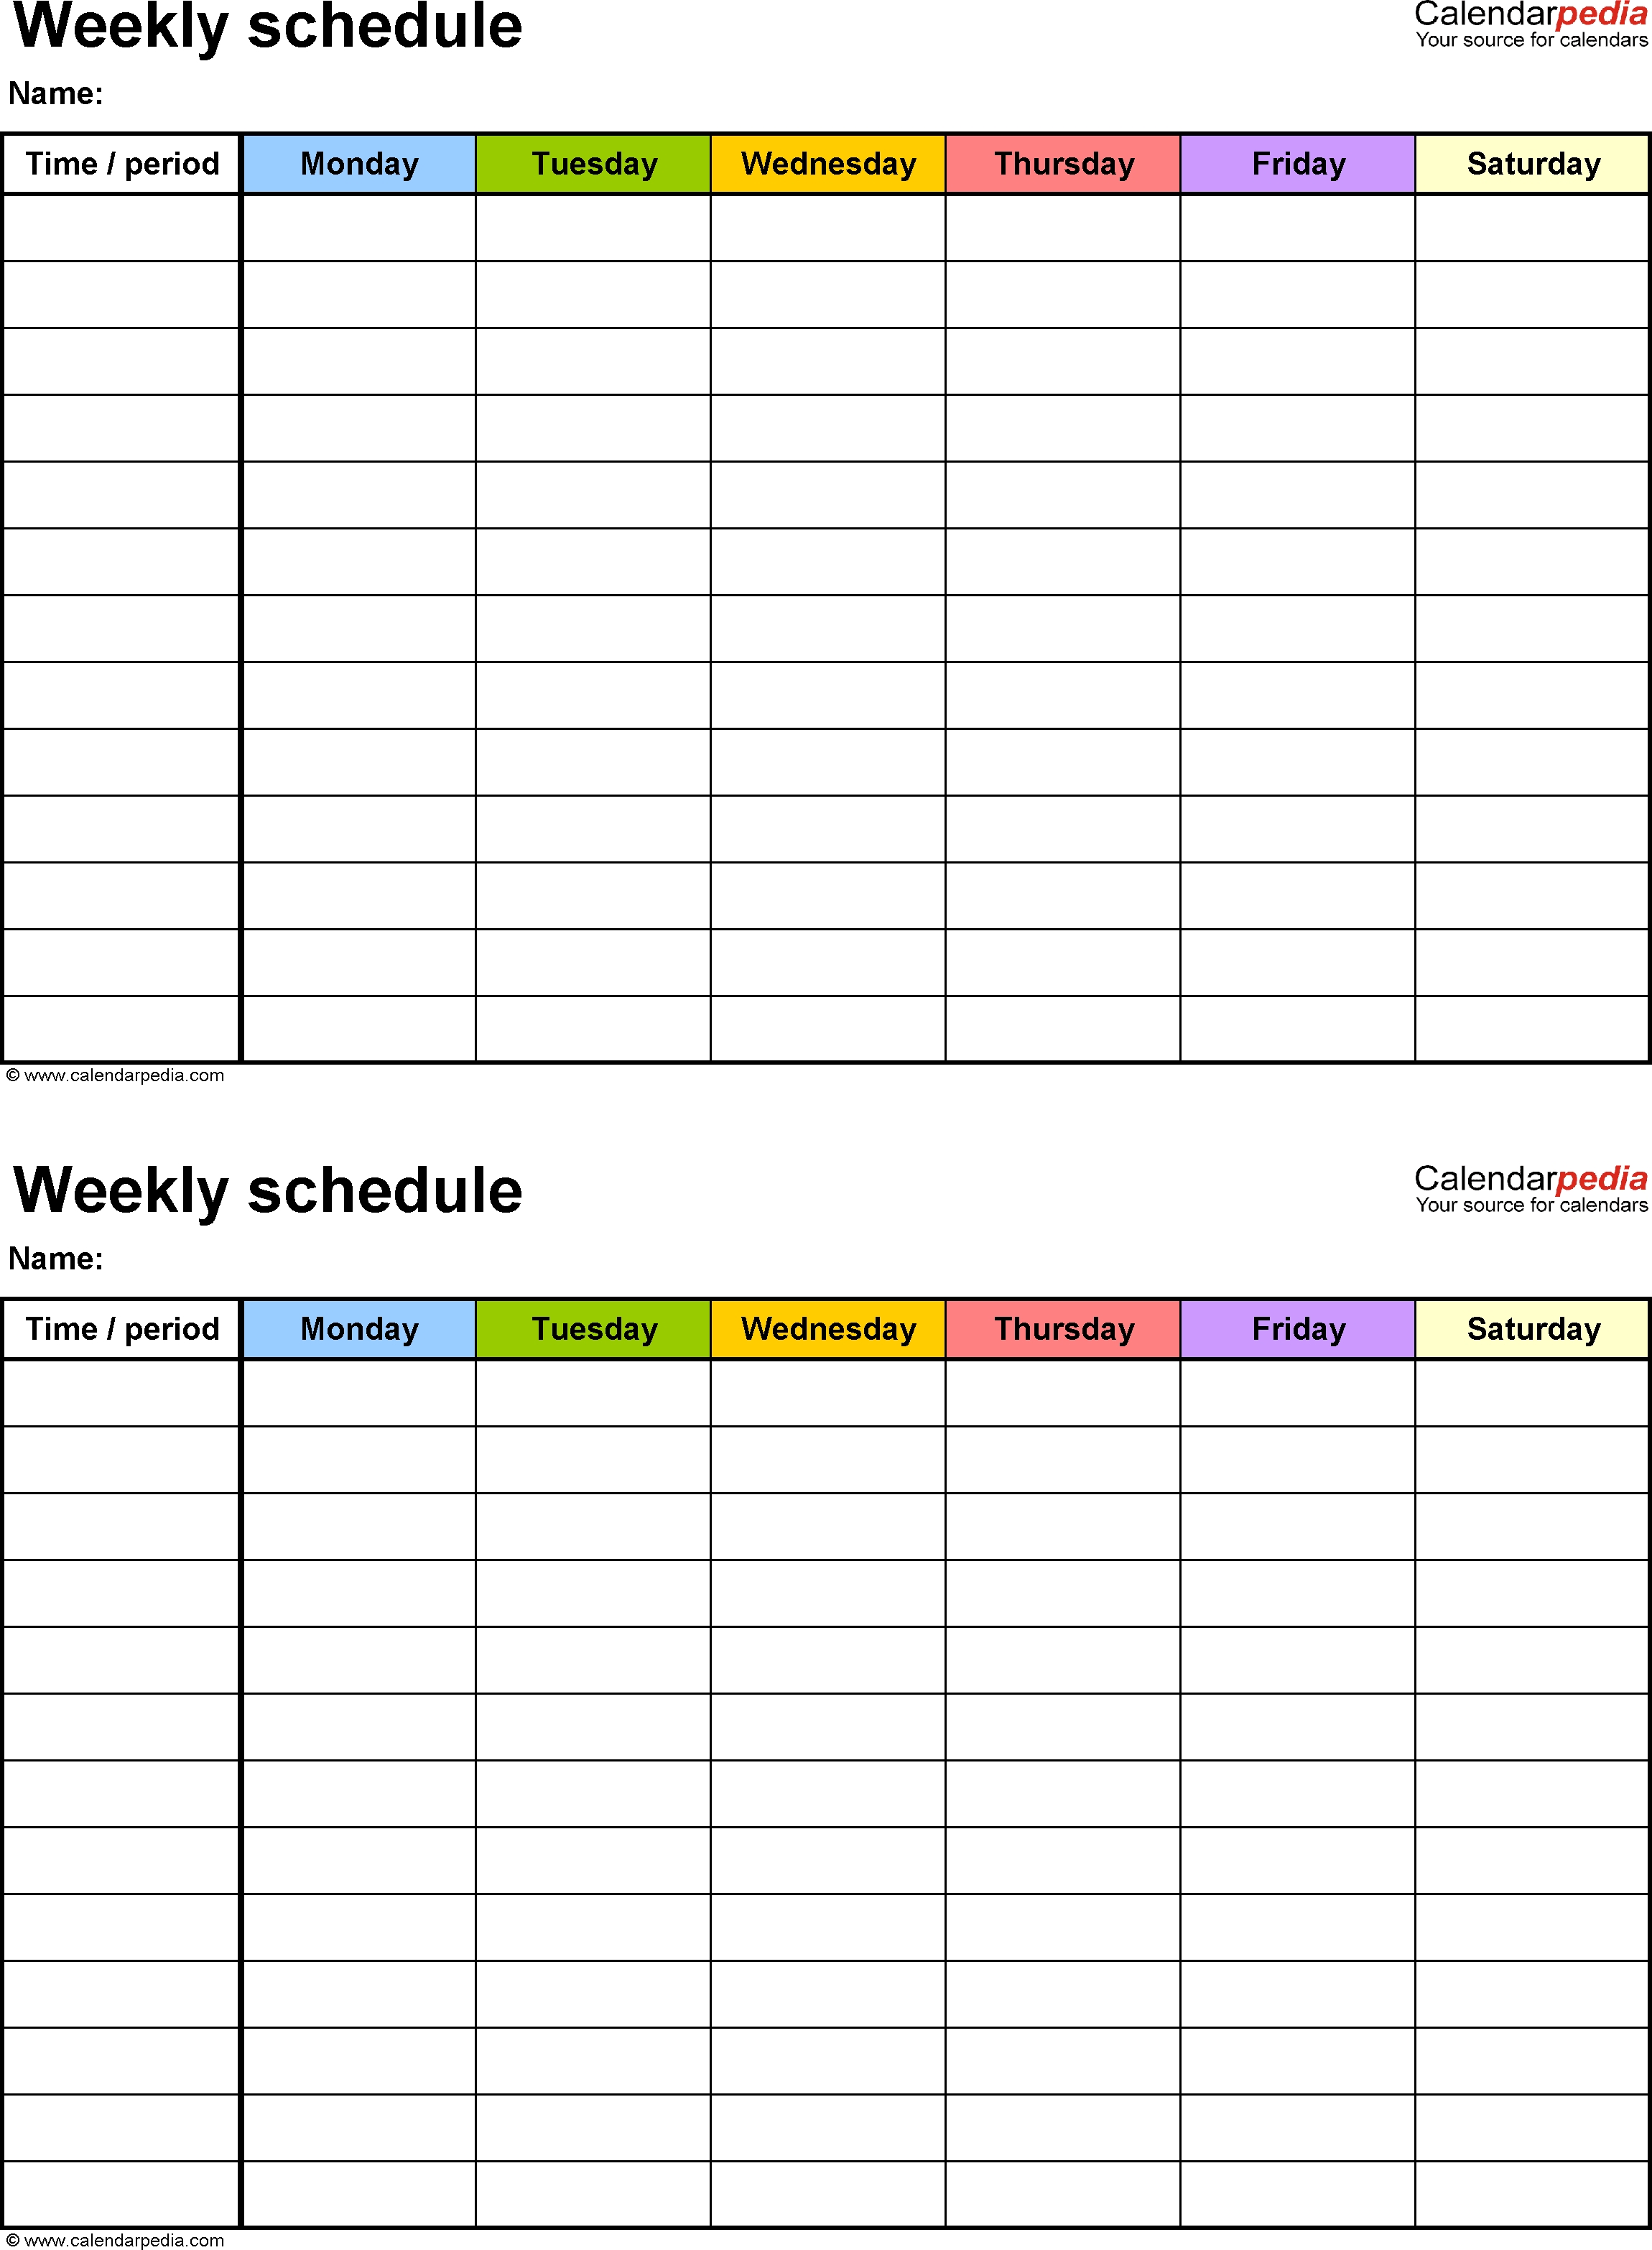 Free Weekly Schedule Templates For Excel - 18 Templates throughout Two Week Monday To Friday Calendars